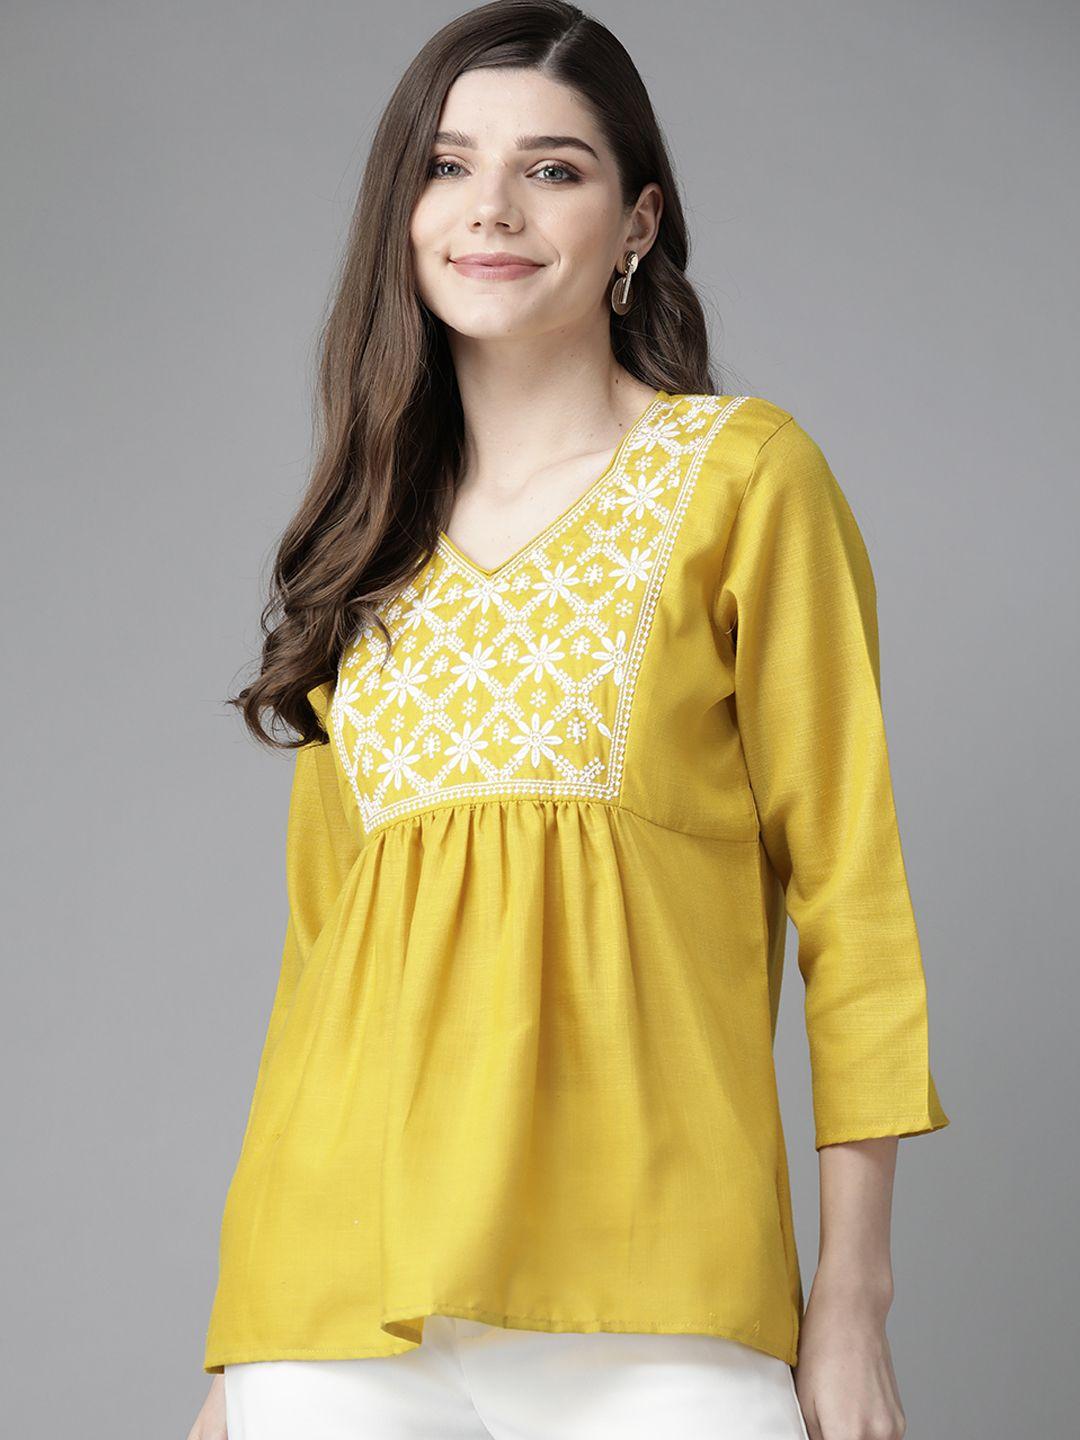 bhama-couture-mustard-yellow-&-white-floral-embroidered-regular-top